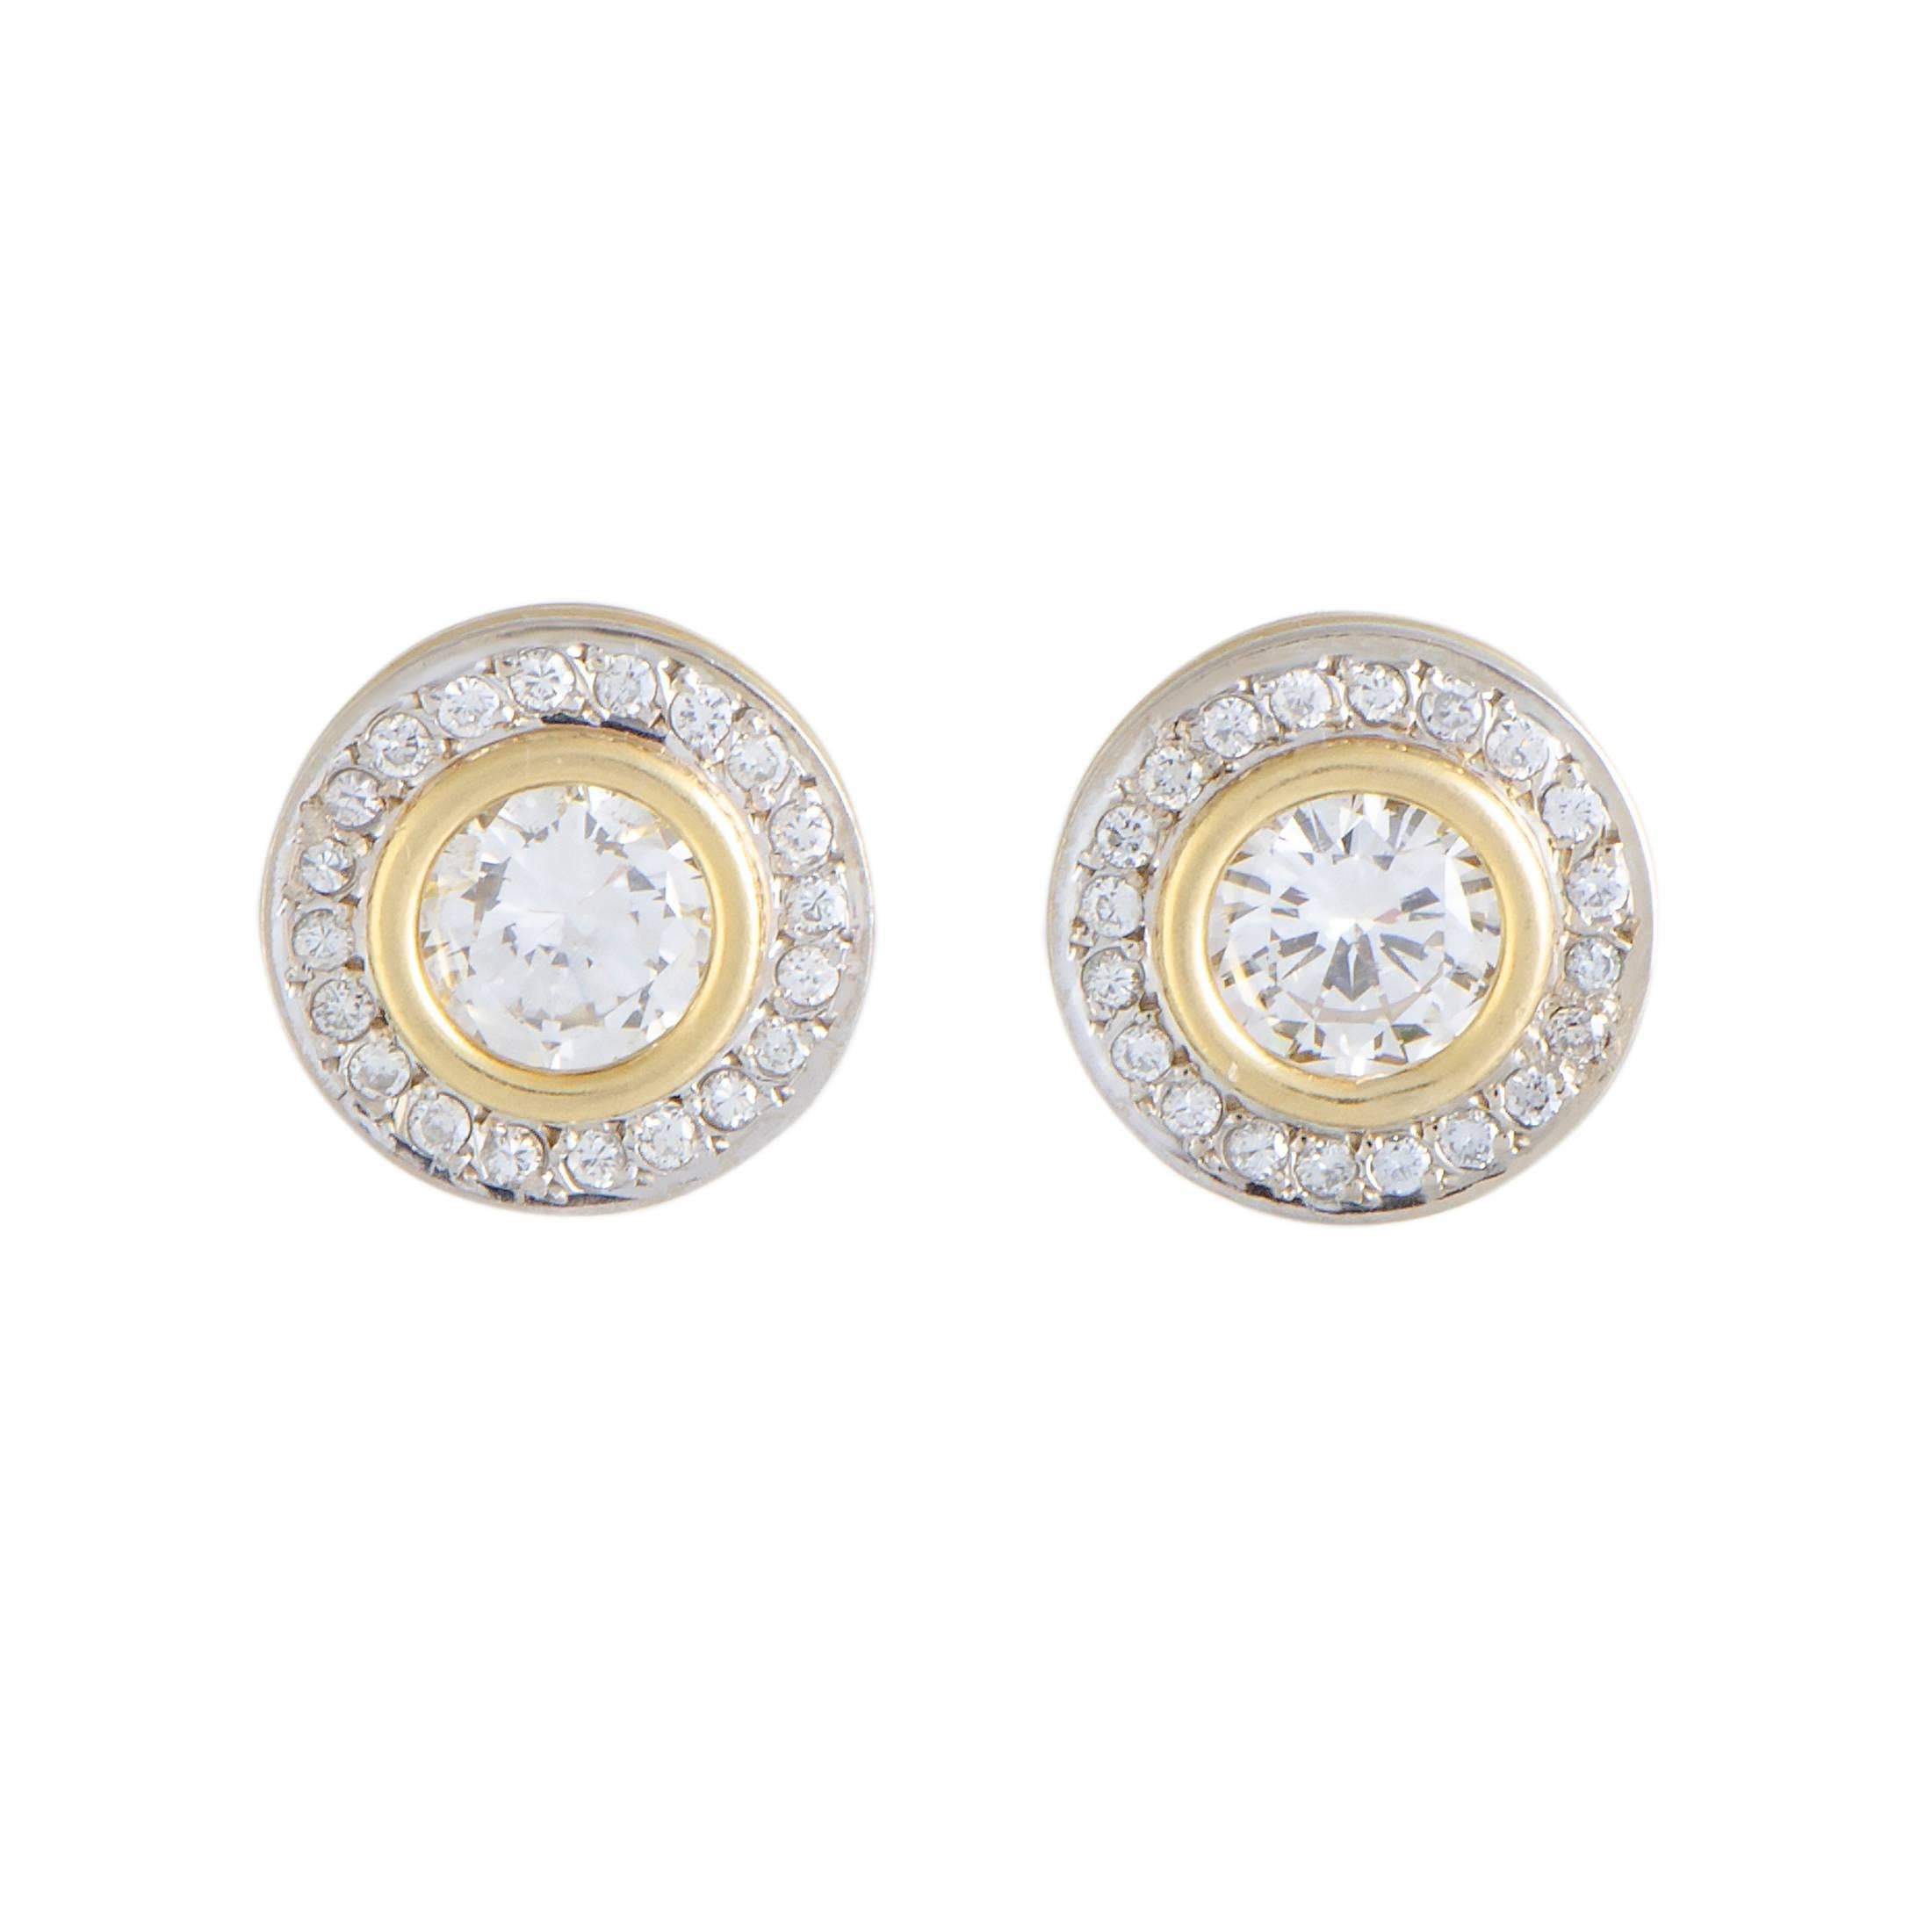 Full Diamond Pave Round Yellow and White Gold Stud Earrings